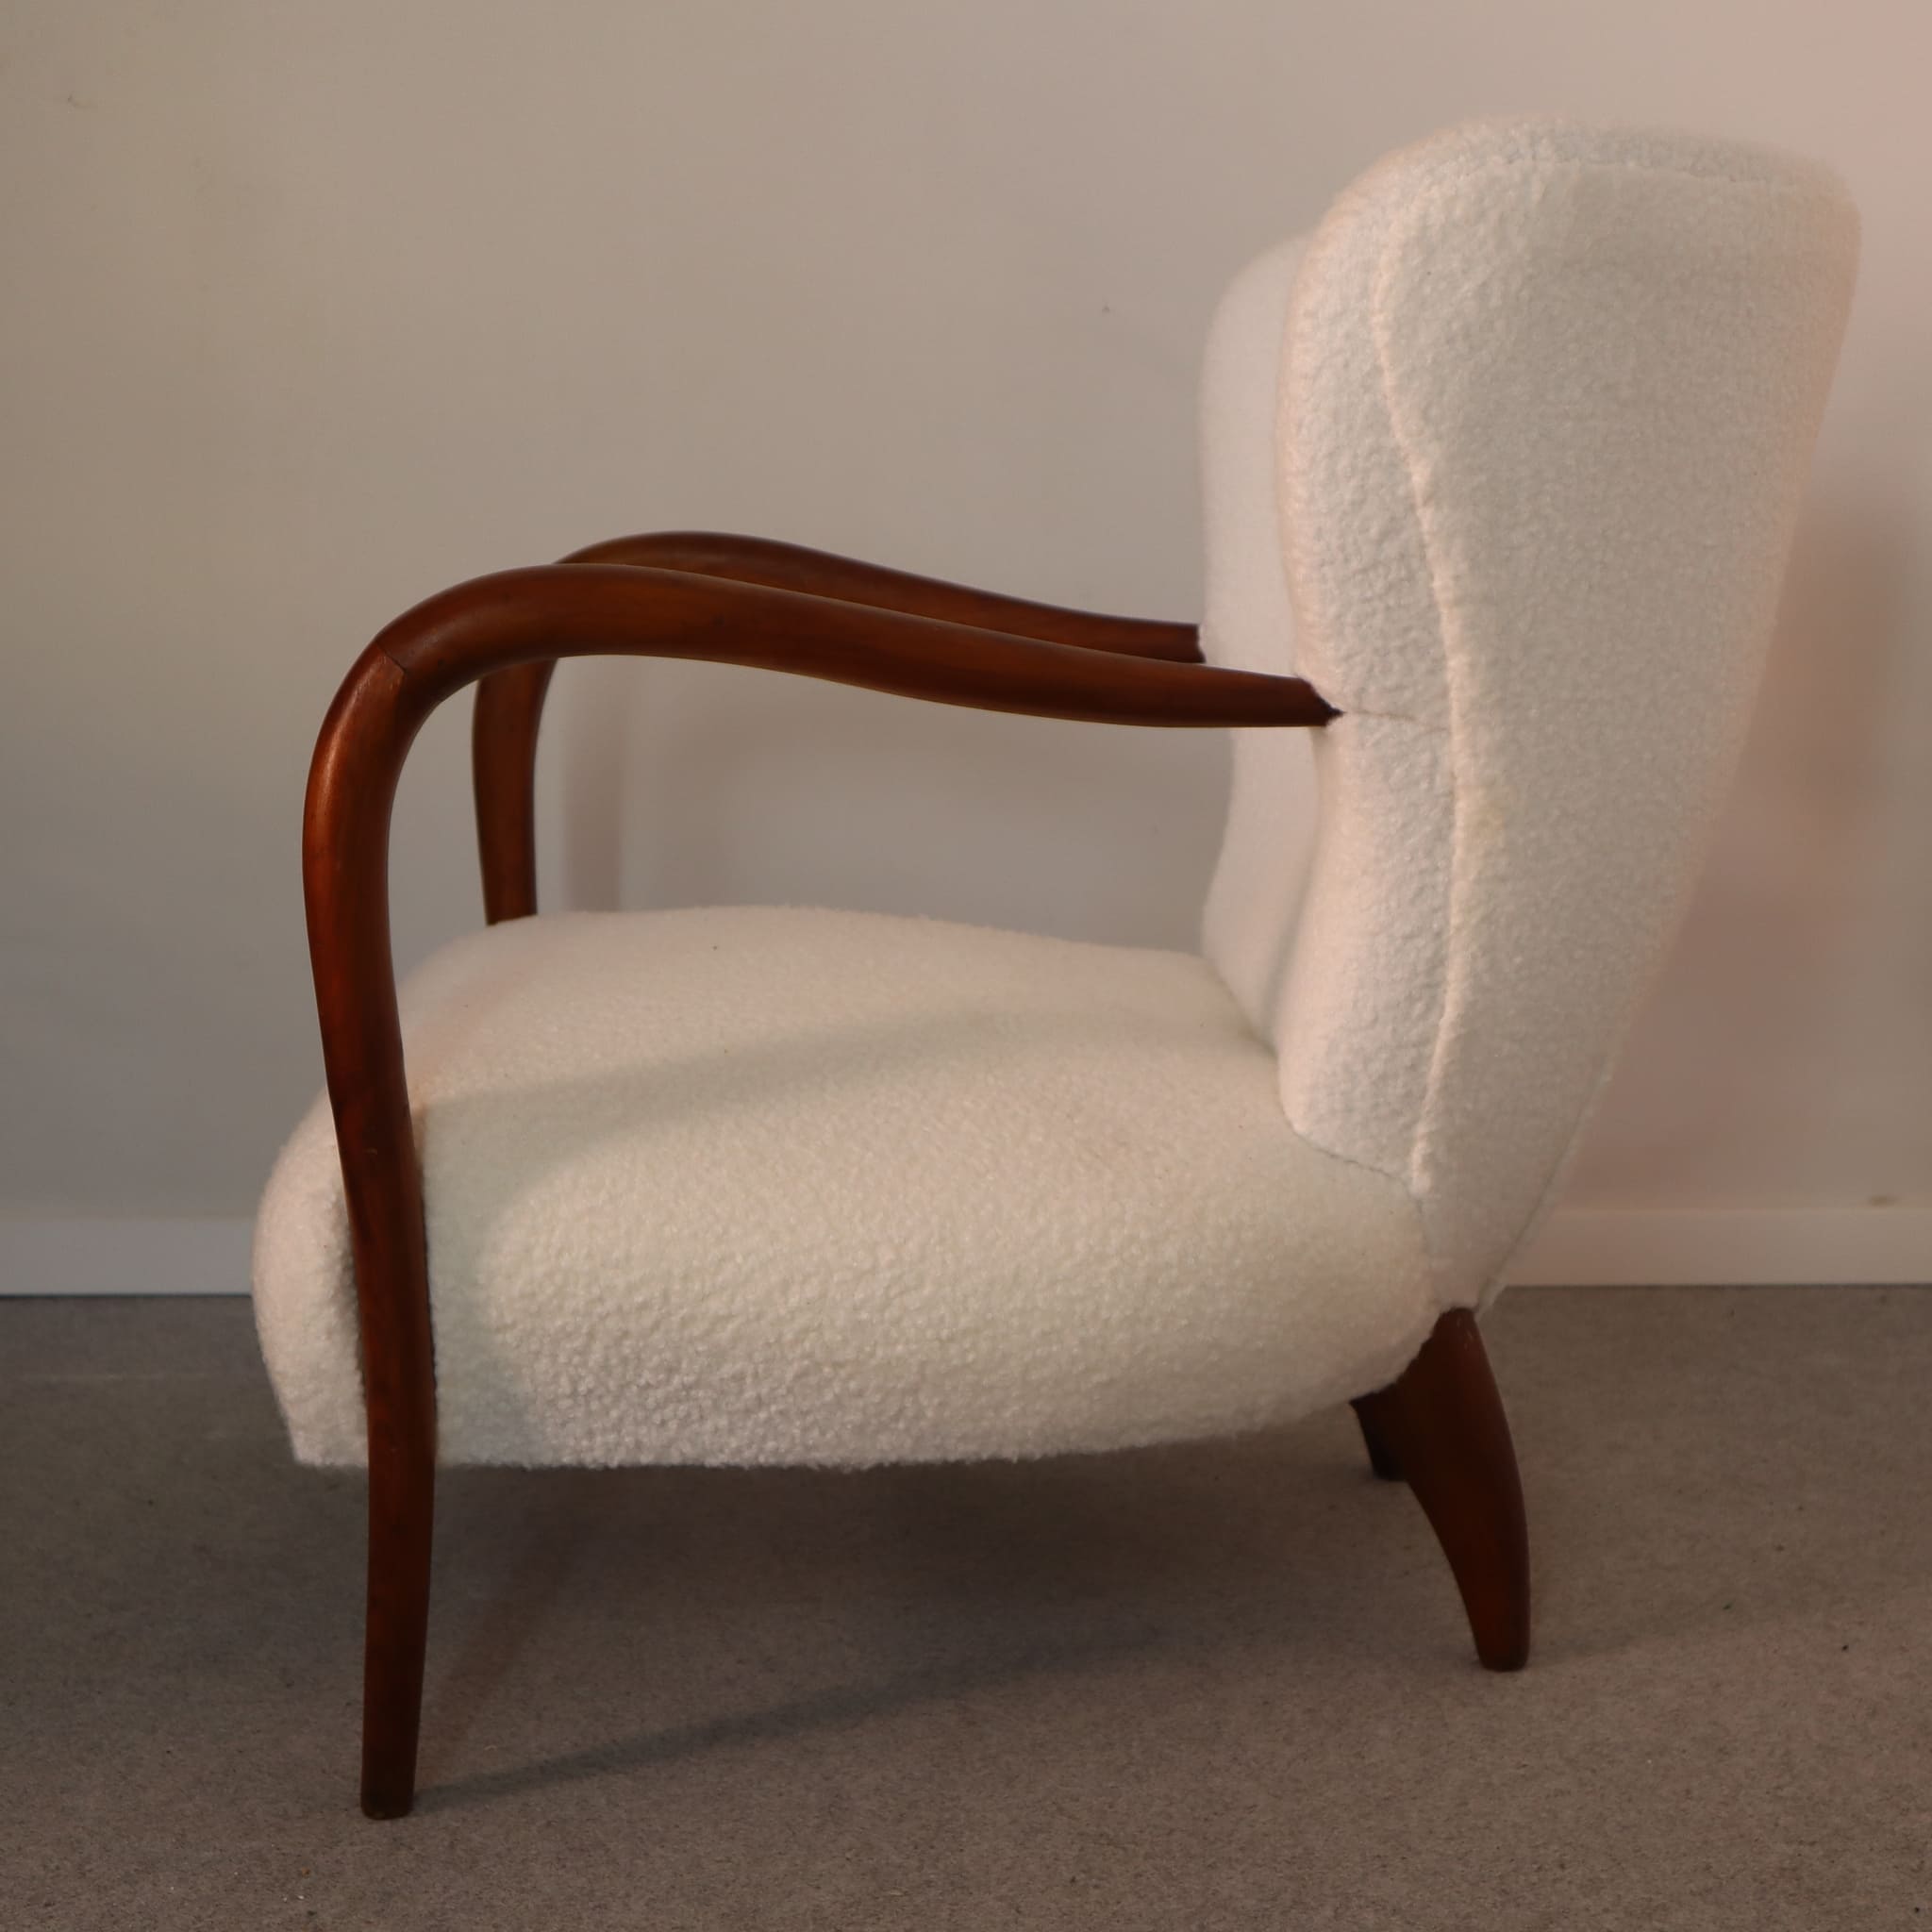 visionidepoca-modern-old-armchair-40s-white-boucle-fabric-cherry-wood-structure-vintage-armchair-side-view